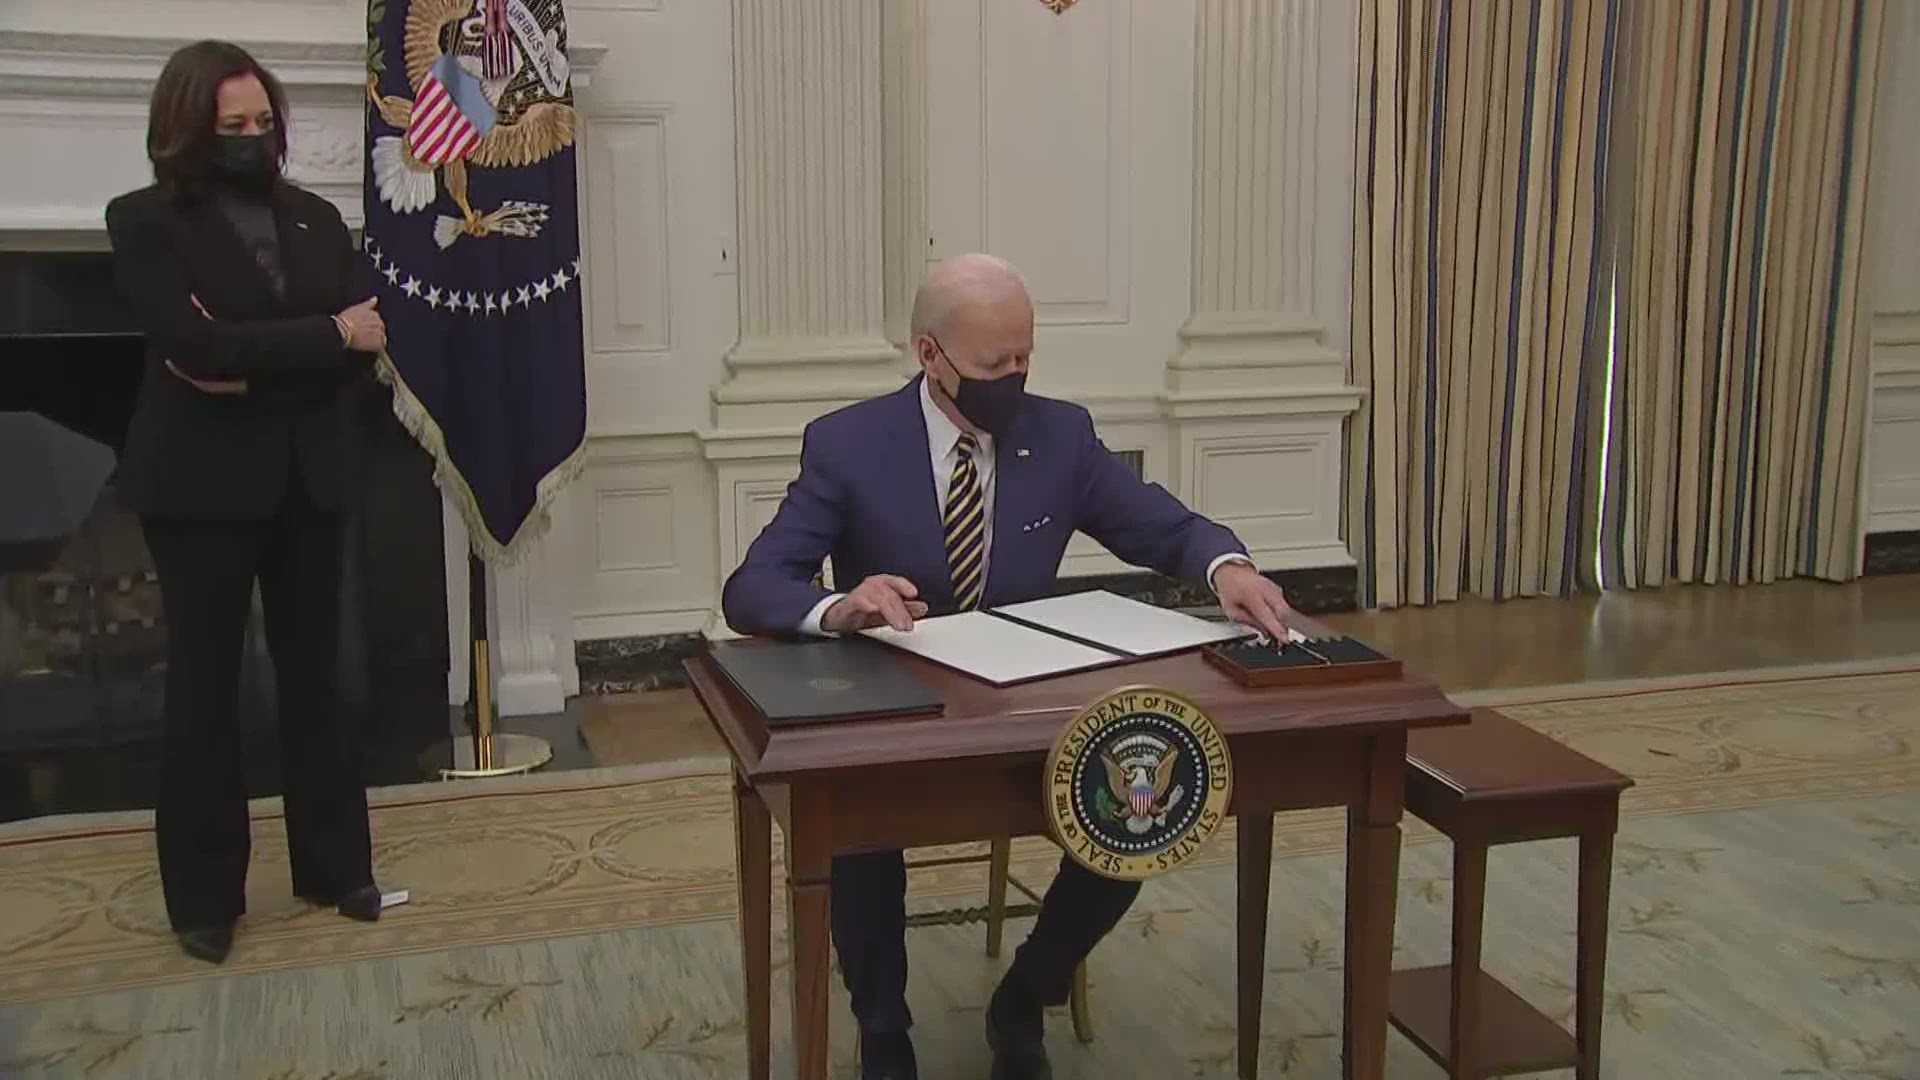 President Joe Biden signed two executive orders Friday to increase food aid, unemployment aid and clear a path for $15 hourly minimum wage for federal workers.